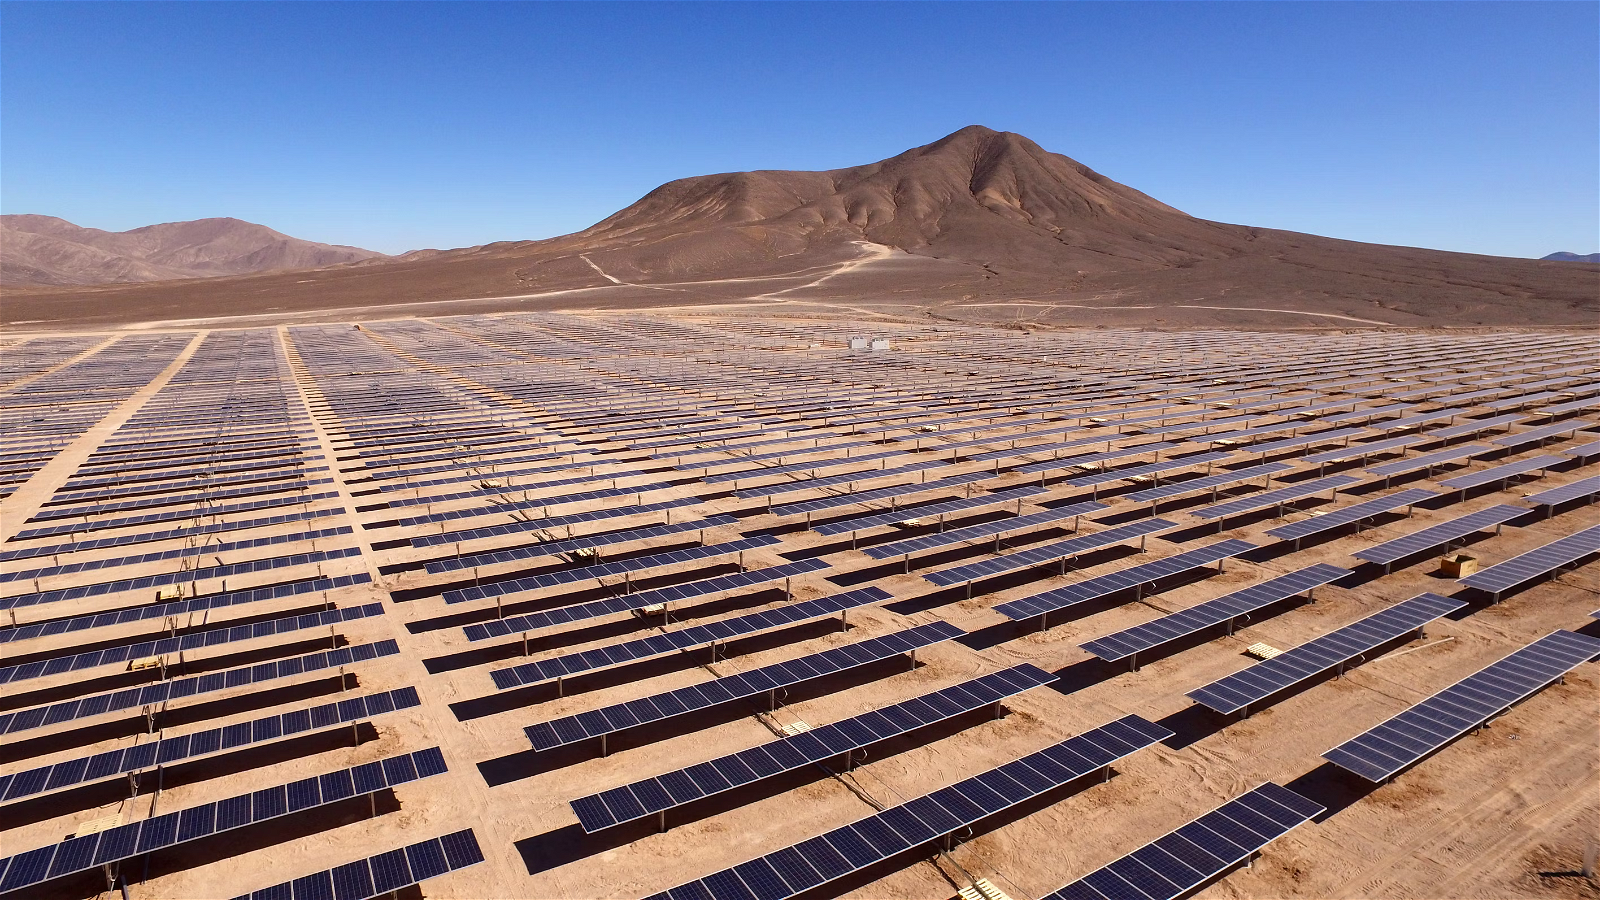 Two Ways to Increase Solar Power Generation in the Middle East